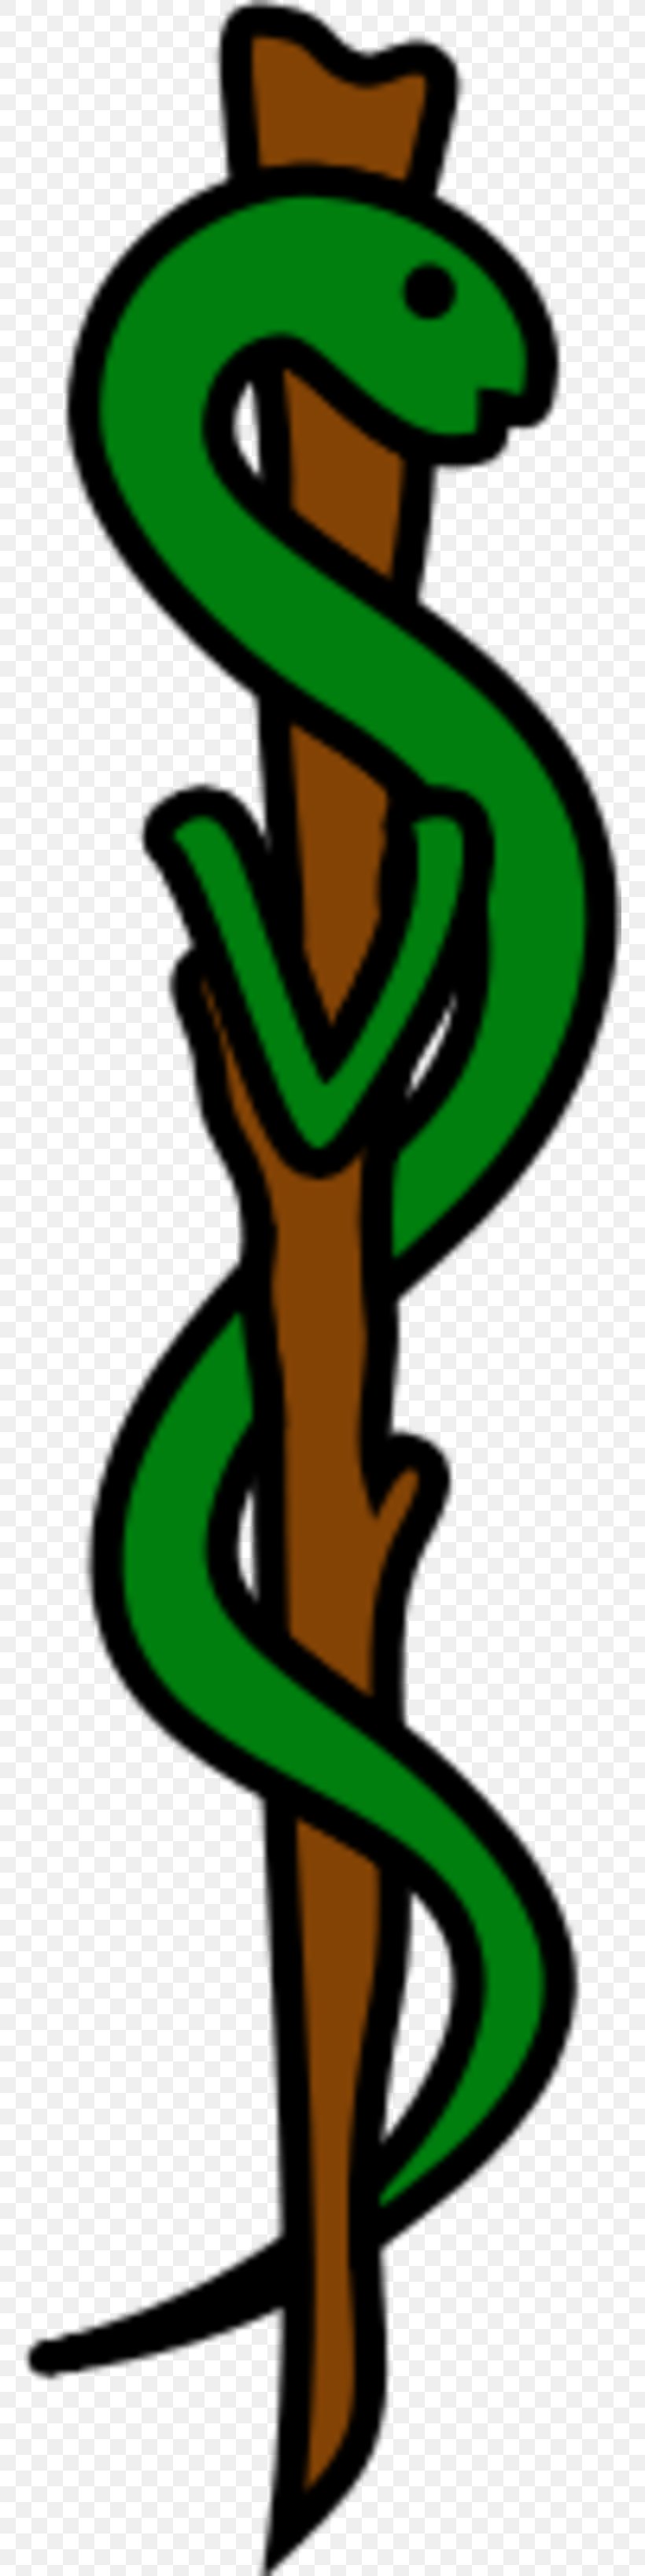 Rod Of Asclepius Veterinary Medicine Strangeways' Veterinary Anatomy Symbol, PNG, 760x3274px, Rod Of Asclepius, Art, Artwork, Asclepius, Caduceus As A Symbol Of Medicine Download Free